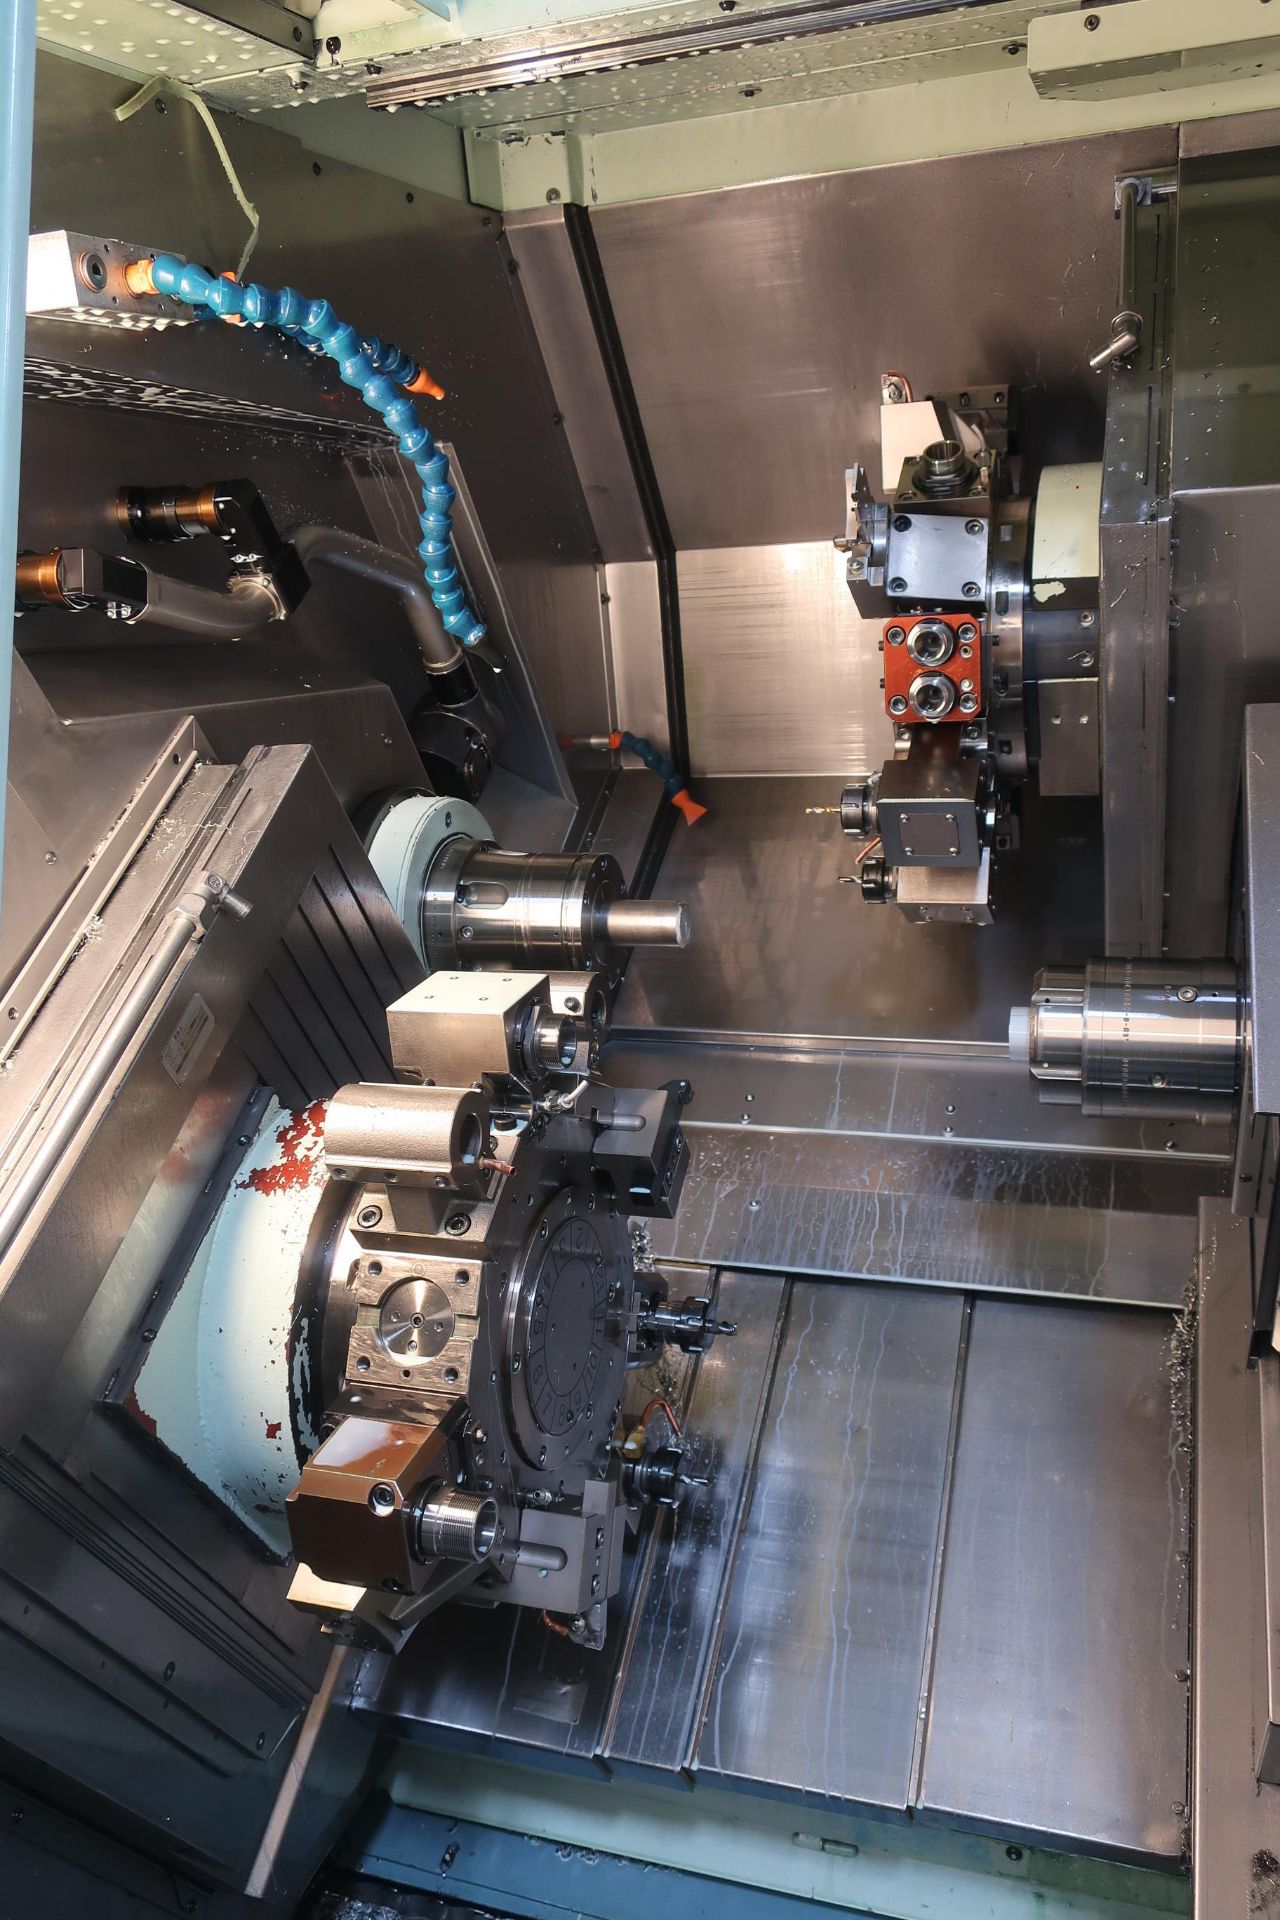 EUROTECH B465 Y2 QUATROFLEX TWIN SPINDLE TWIN TURRET CNC LATHE W/DUAL Y-AXIS, NEW 2011, SN 11045 - Image 3 of 19